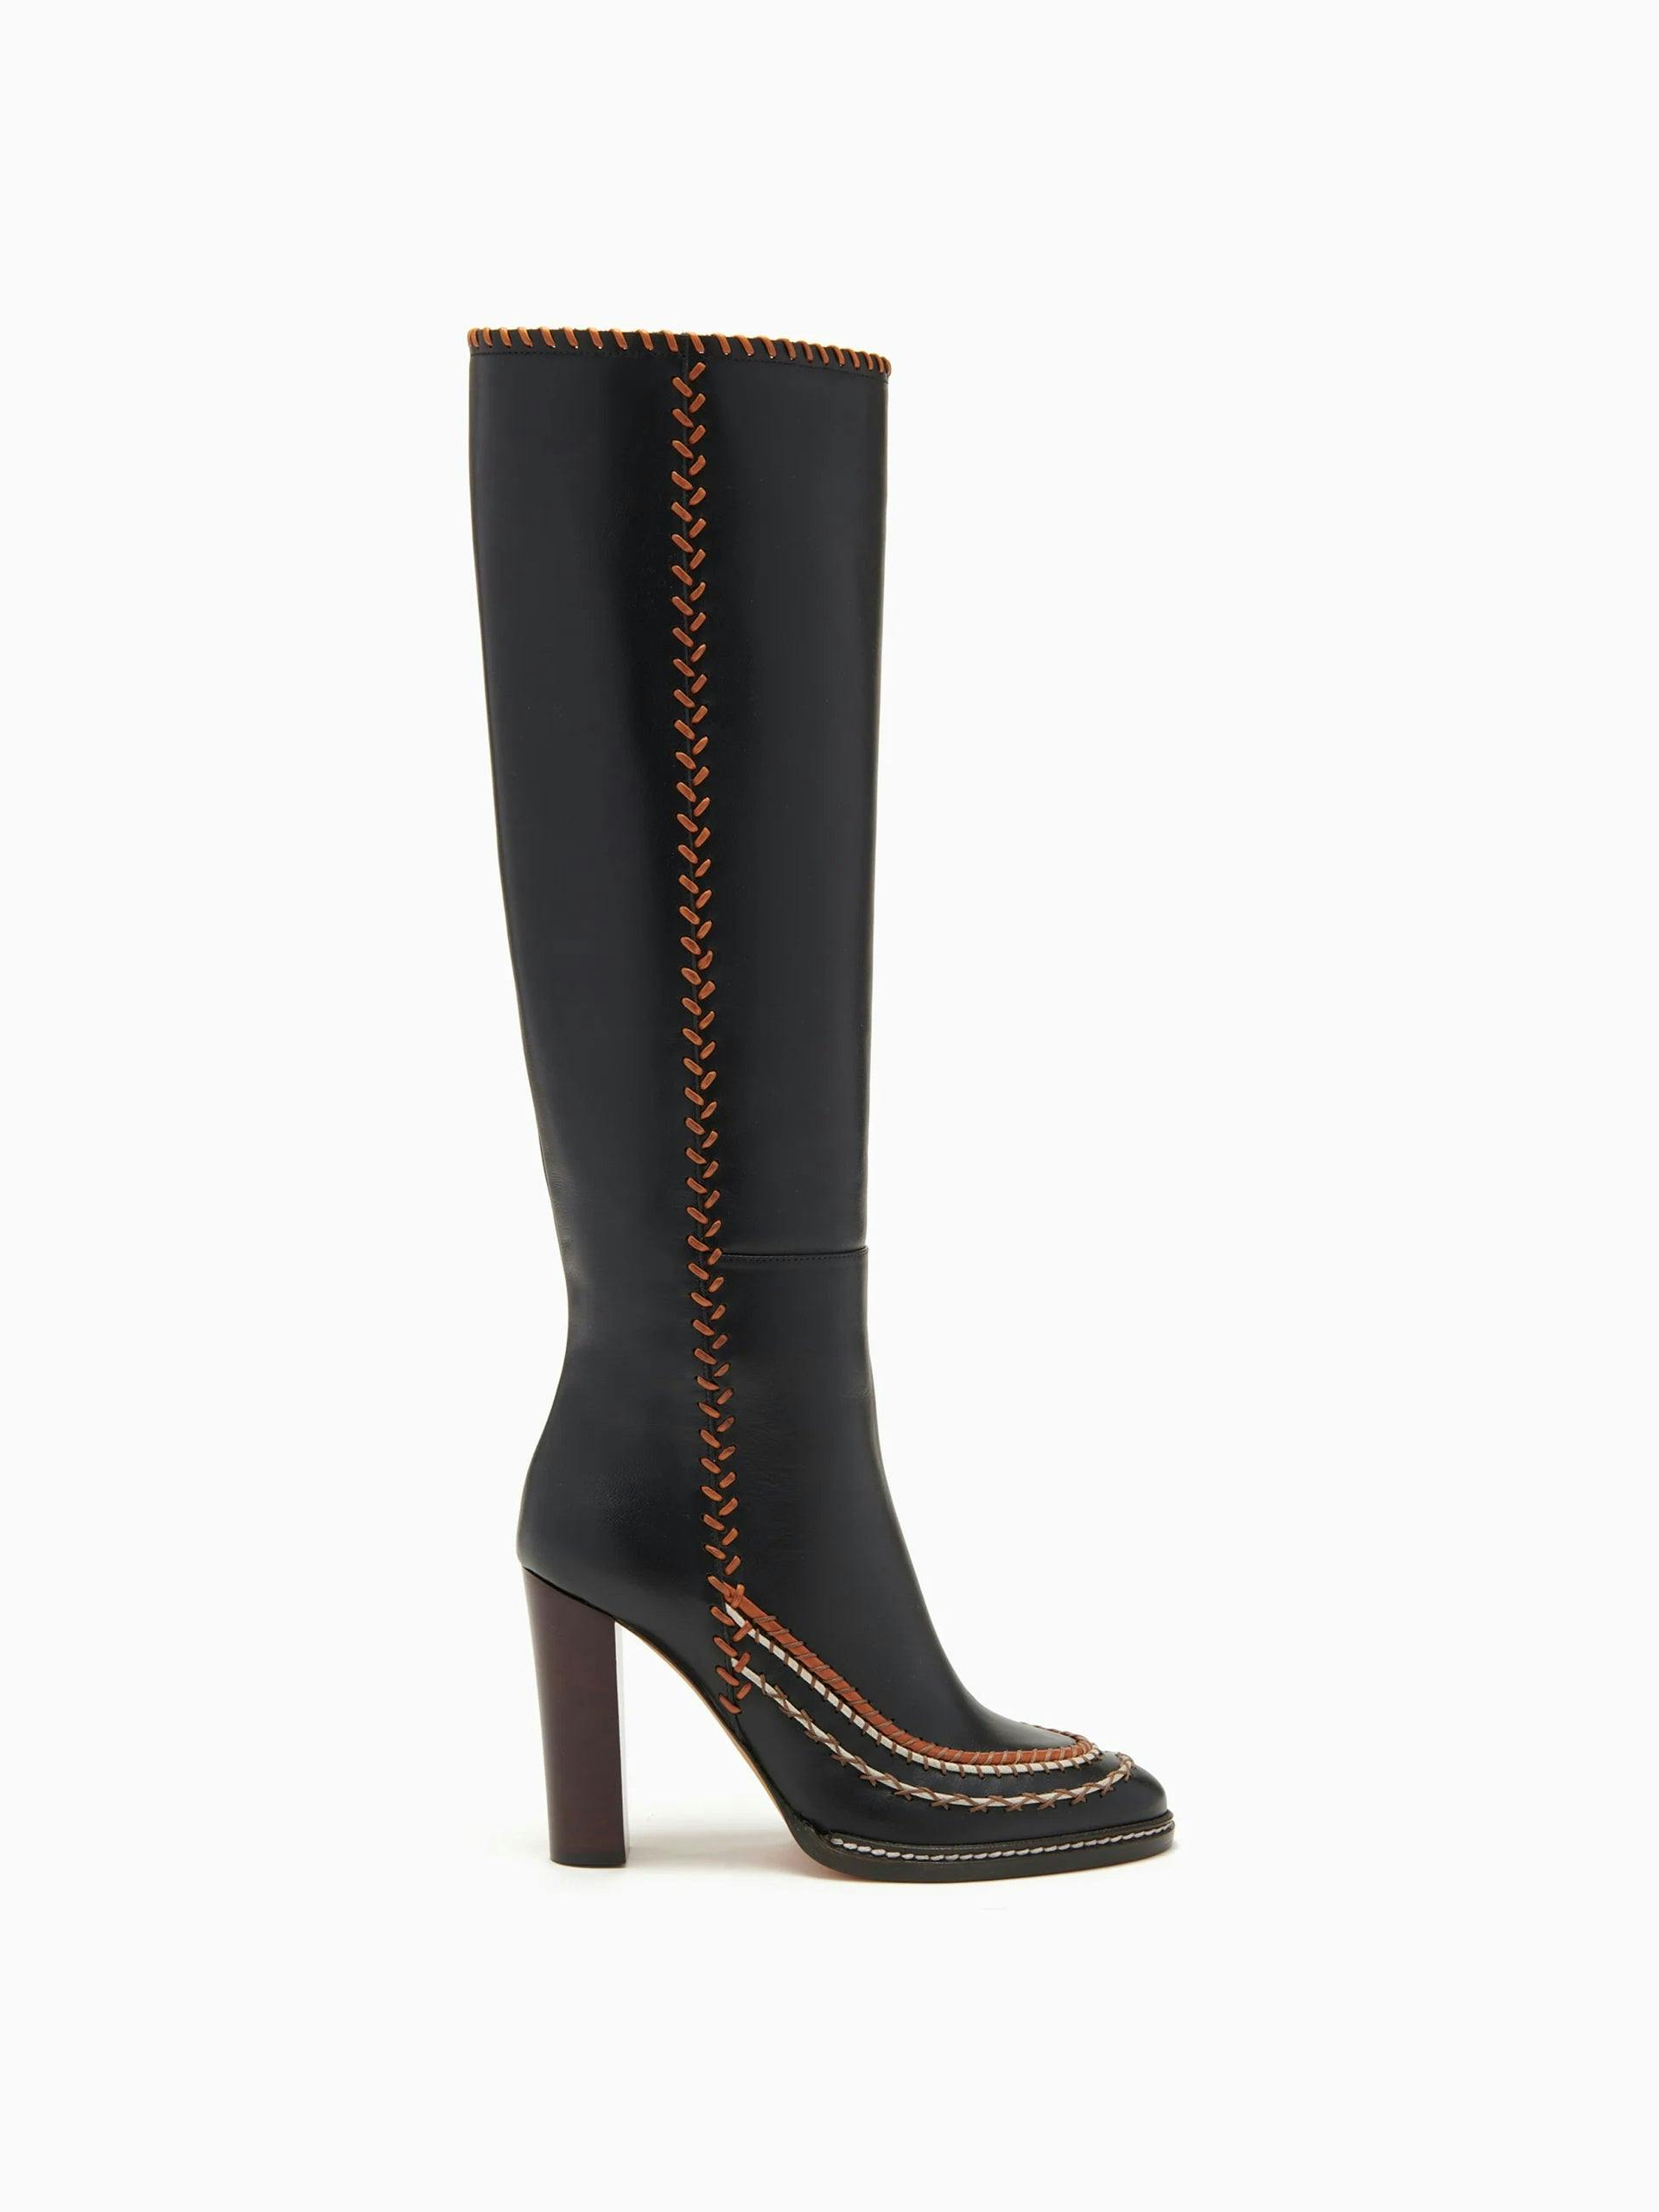 Black leather knee-high boots with contrast stitching